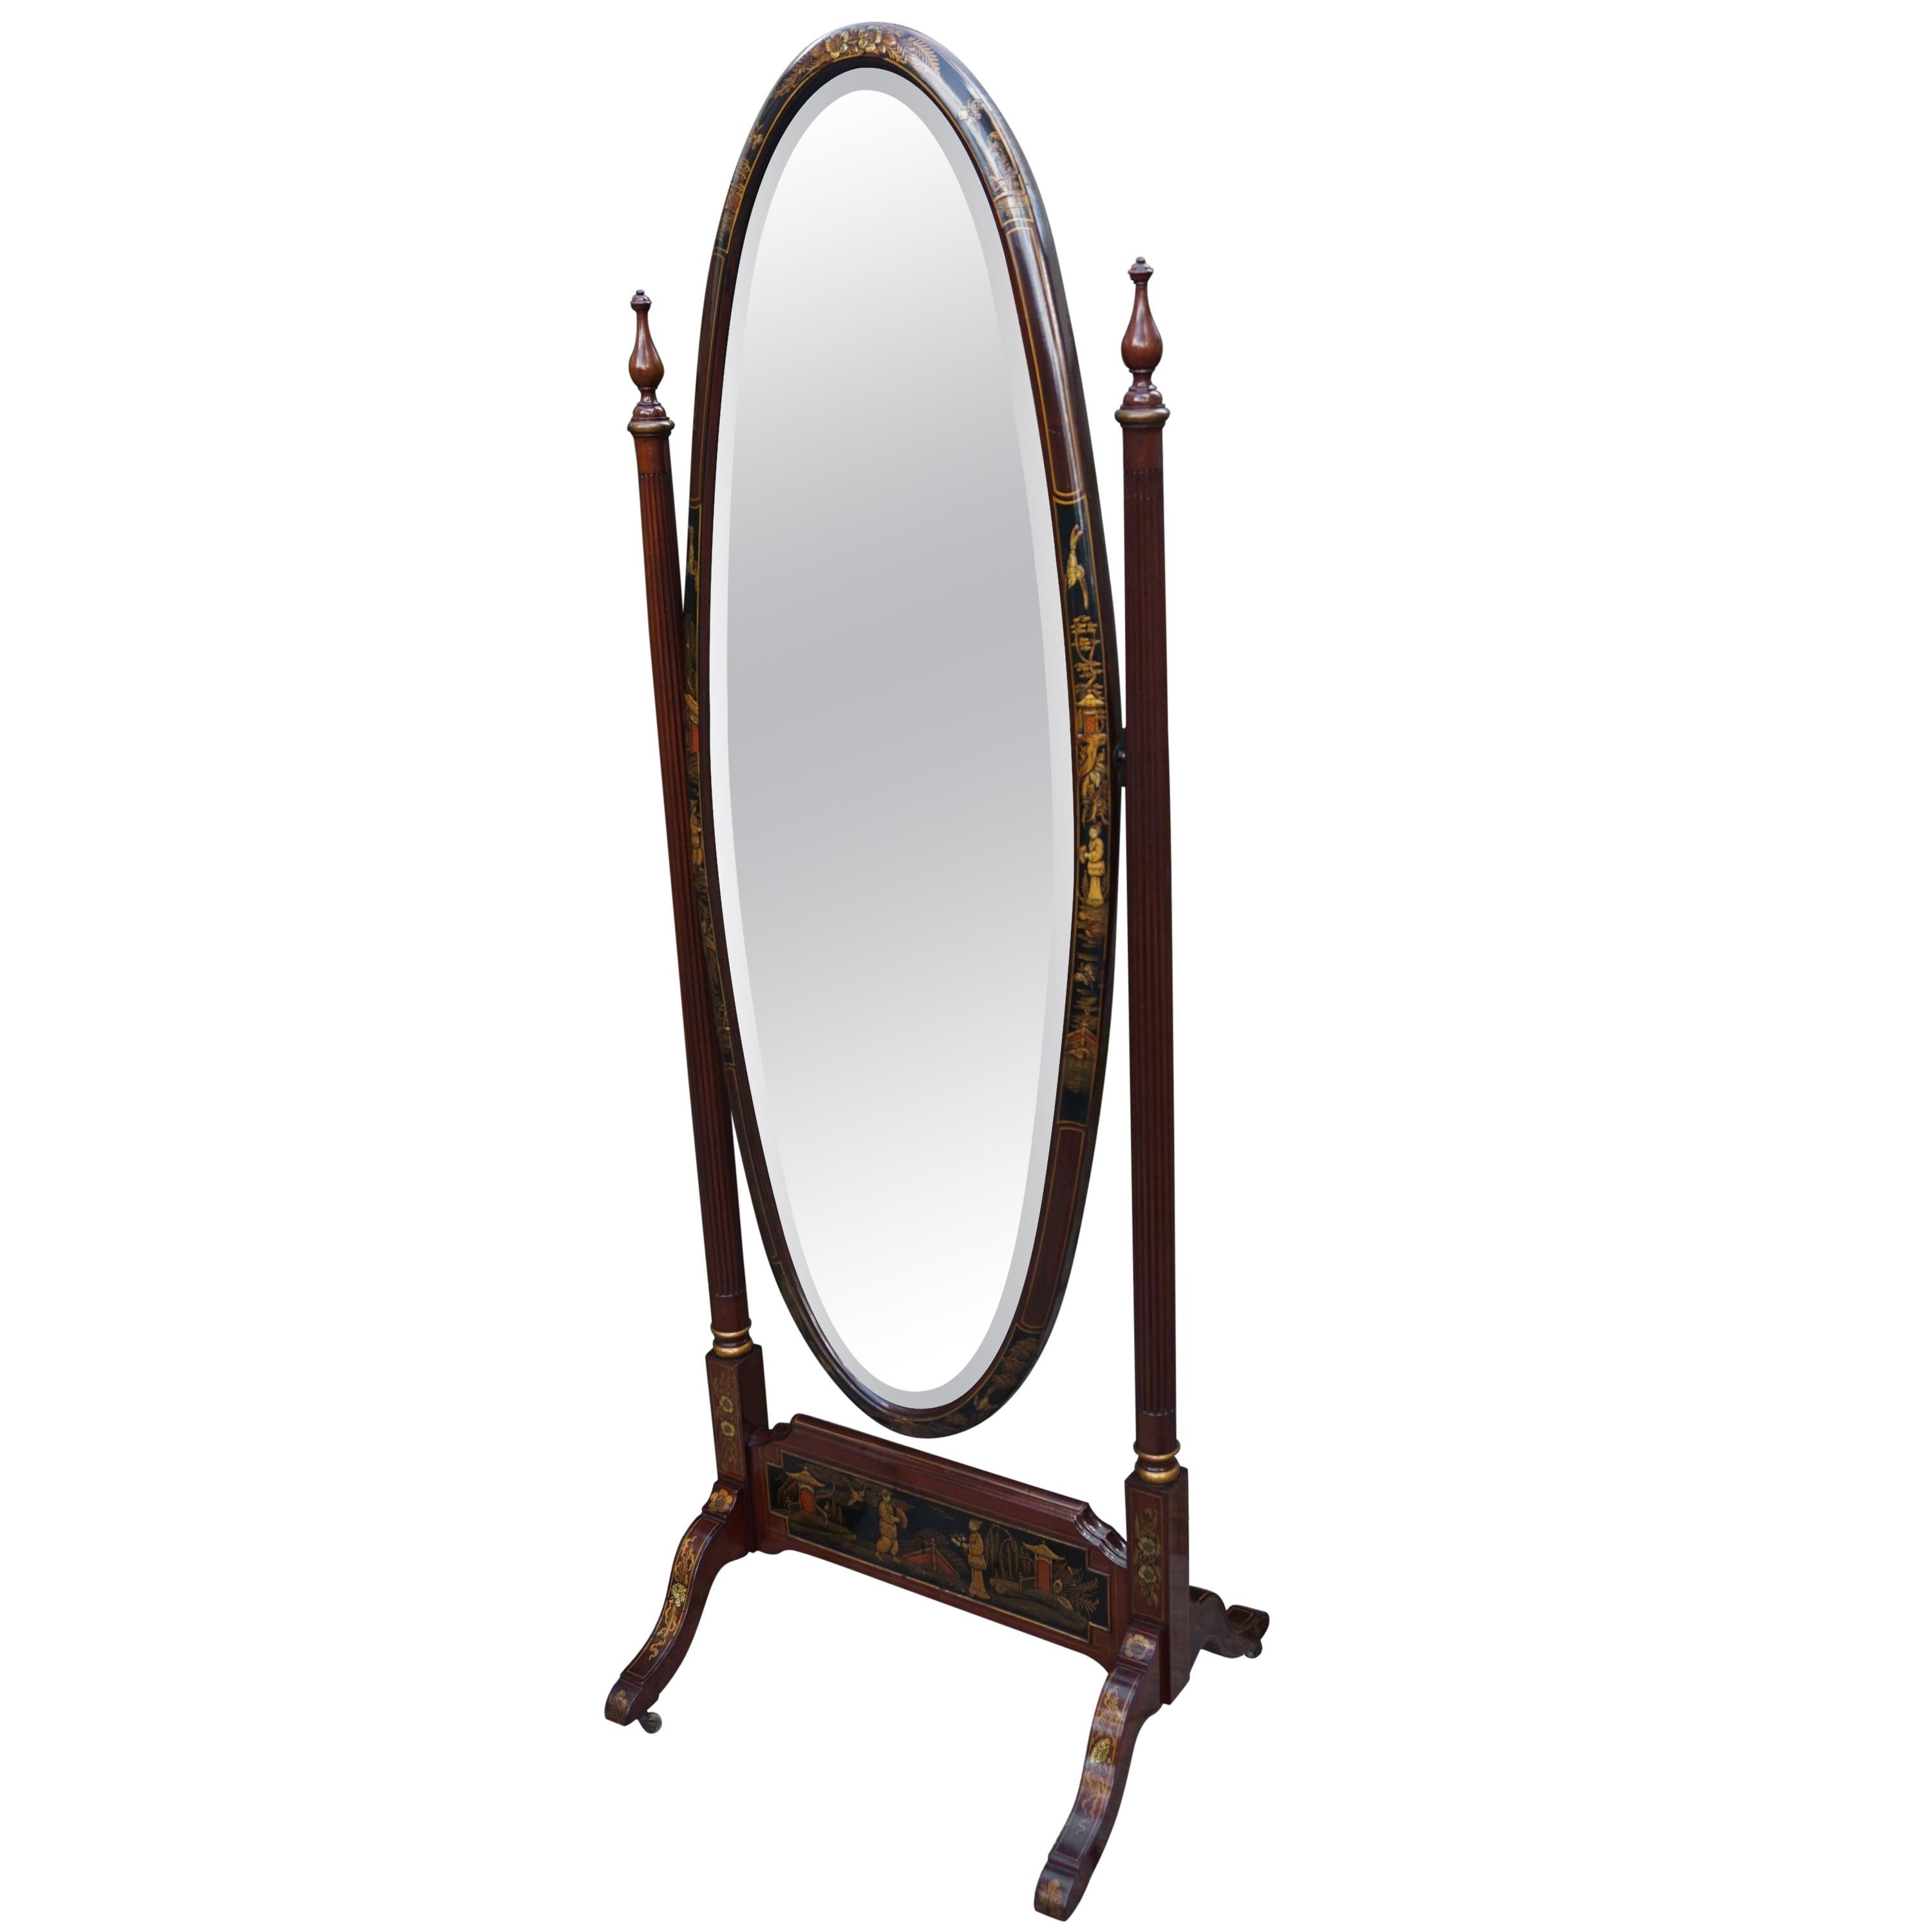 Chinoiserie Floor/ Length Mirror with Hand Painted Decor on Mahogany Frame